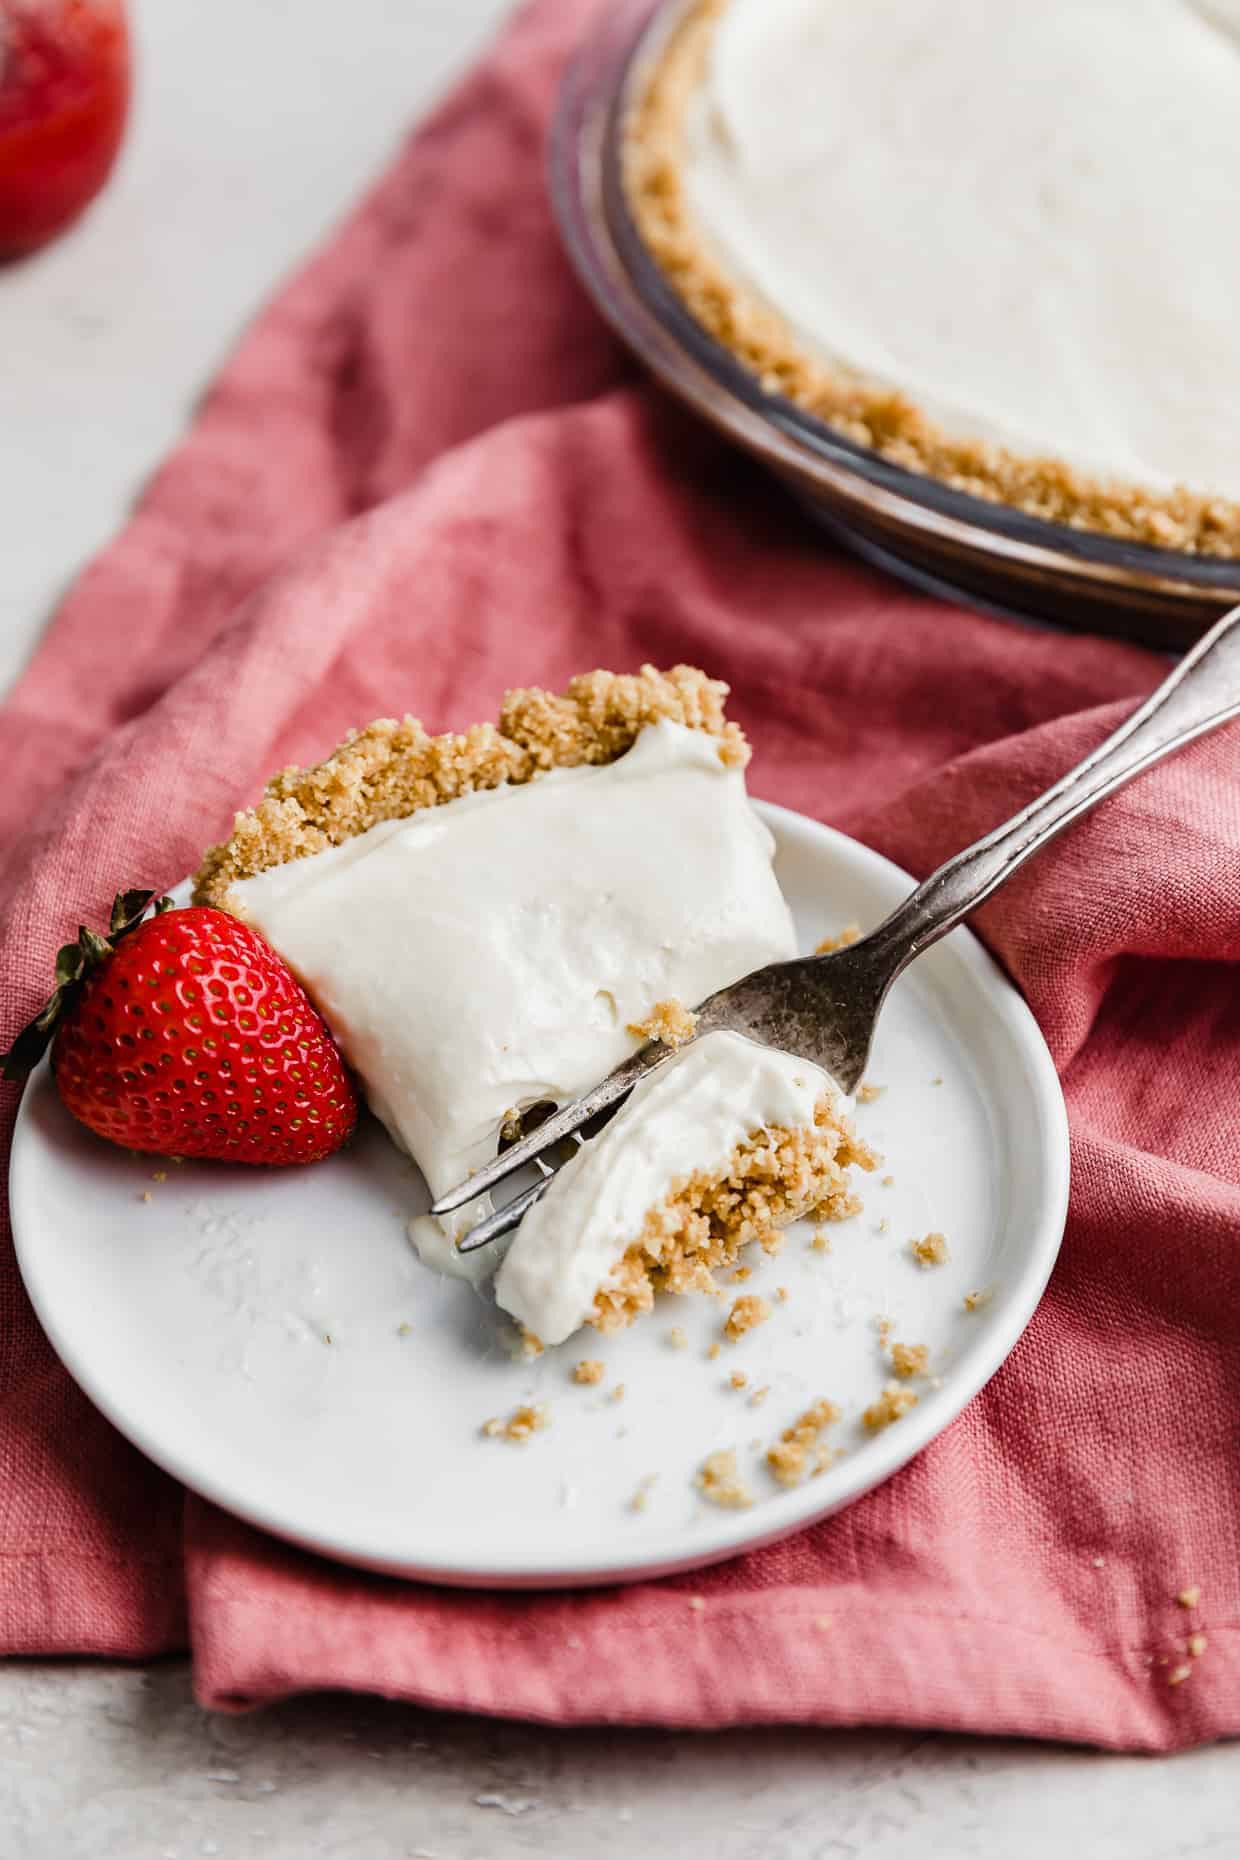 A slice of no-bake cheesecake on a white plate with a fresh strawberry to the side.